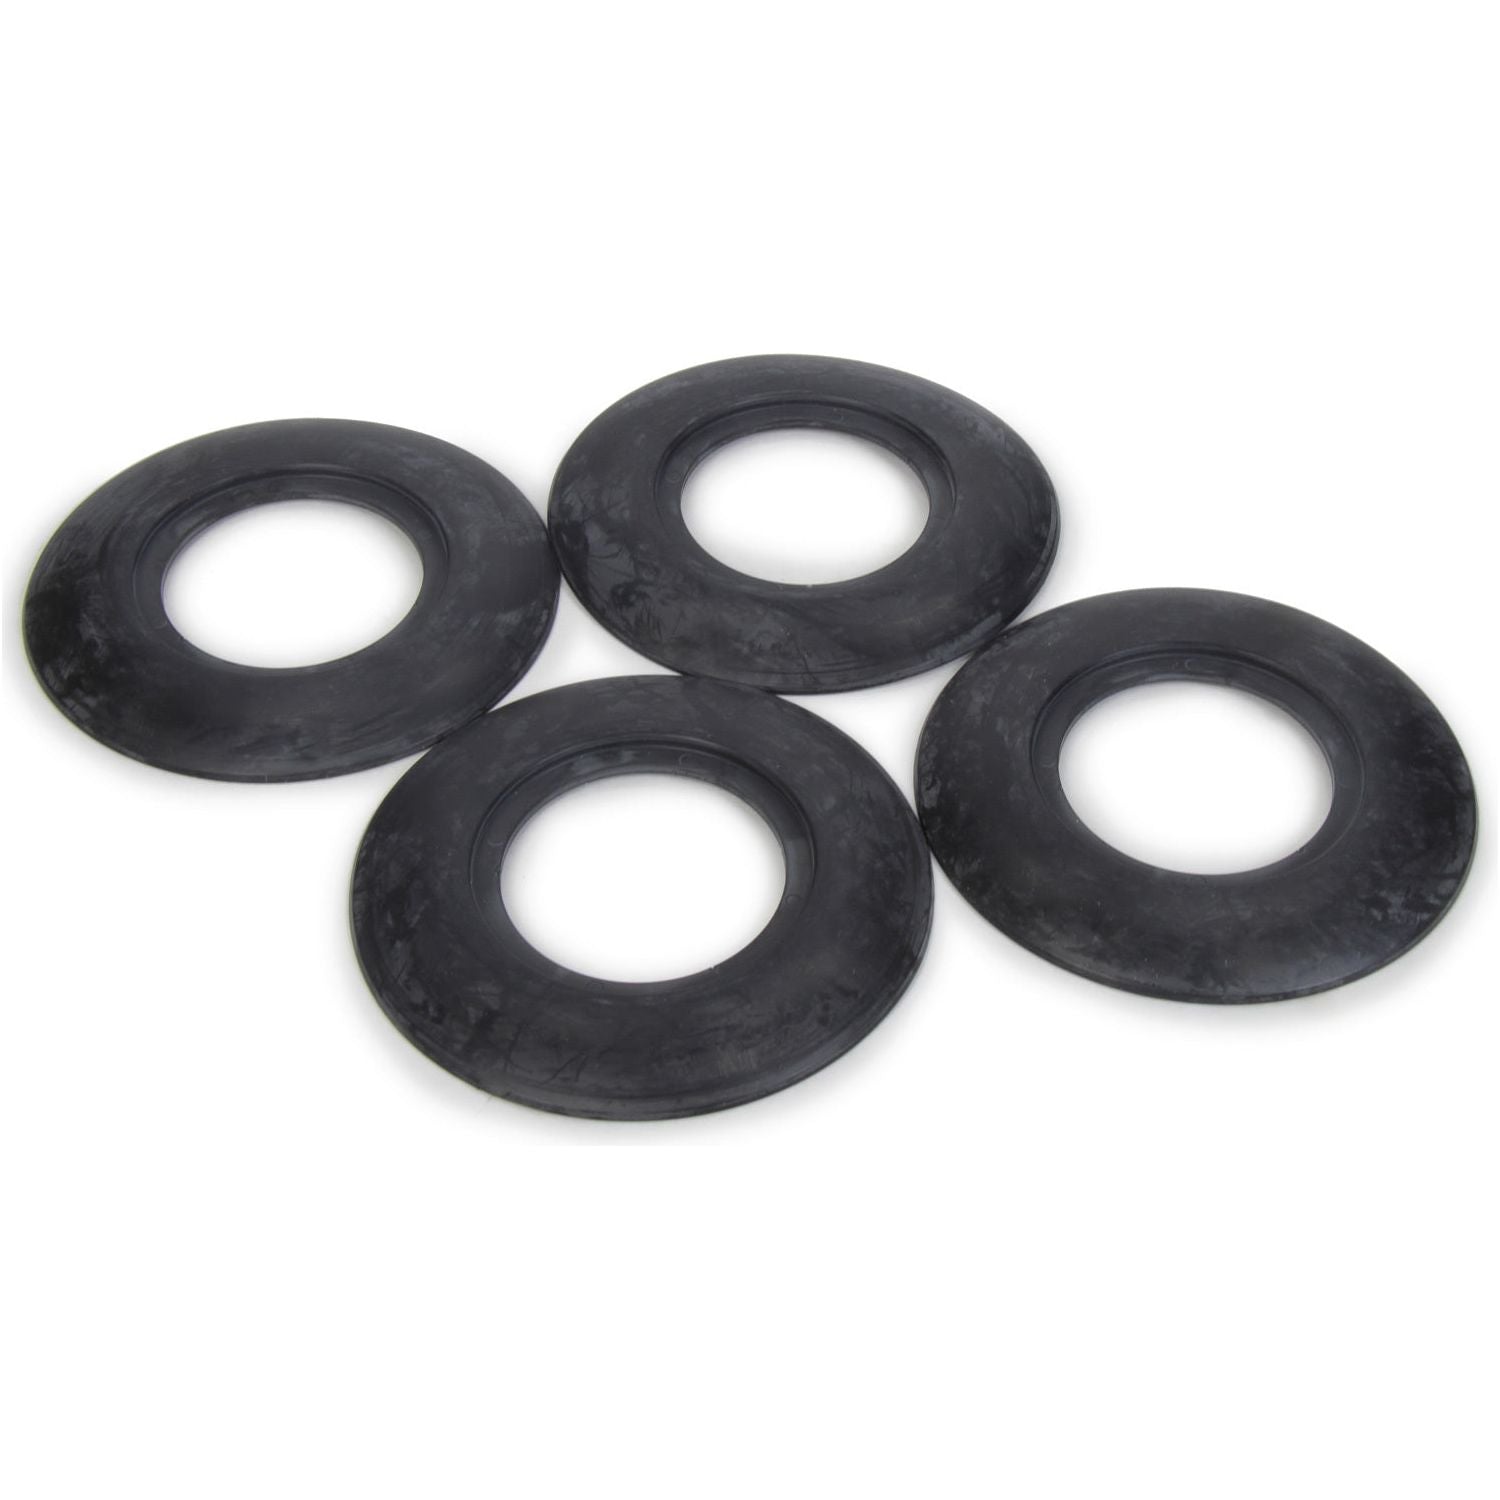 REESE 58458 - Replacement Part Trim Rings (Qty. 4) for GM & Dodge